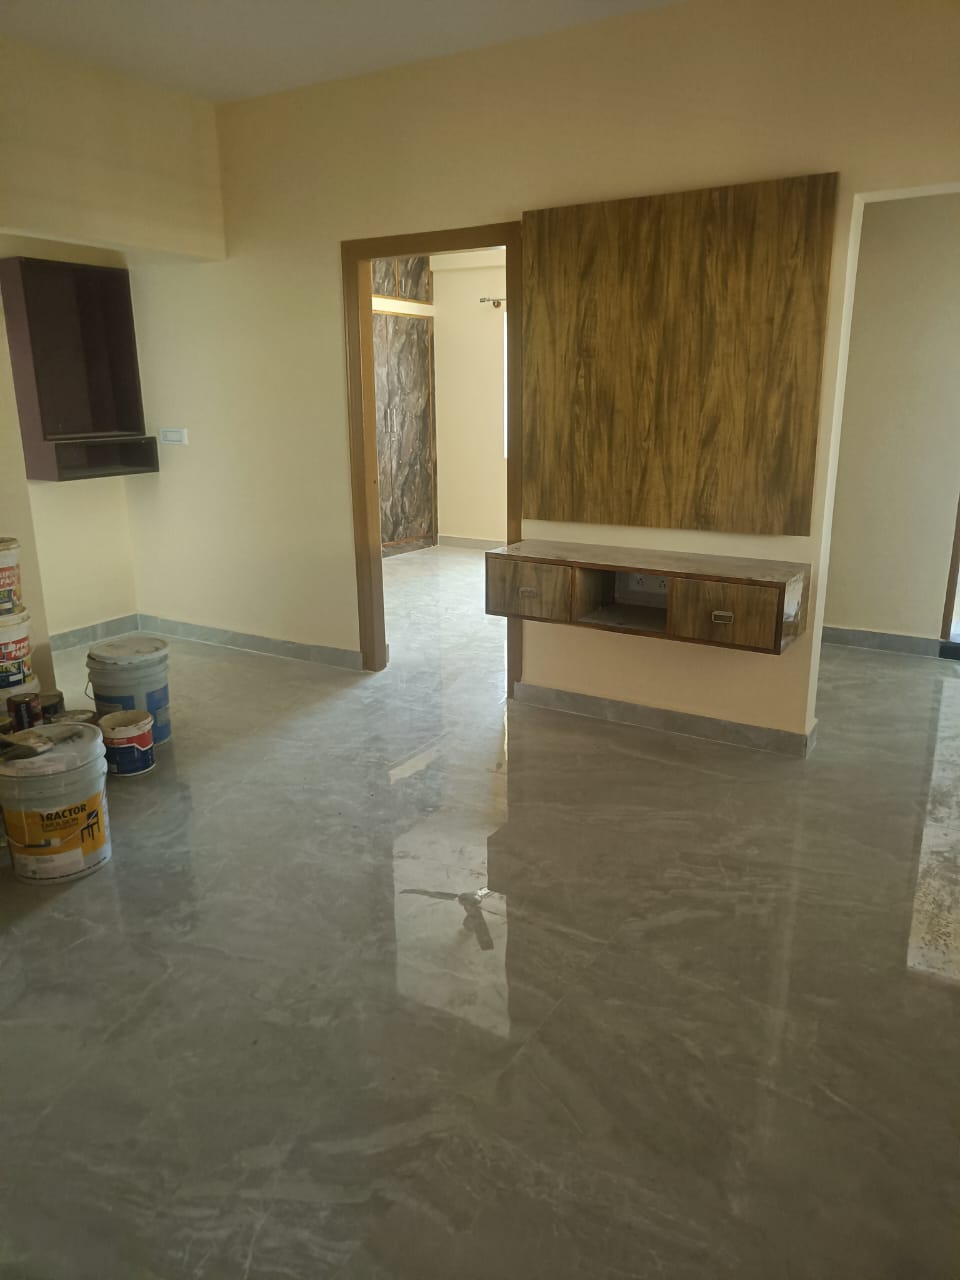 2 BHK Residential Apartment for Lease Only at JAML2 - 2535 in Chikkalasandra